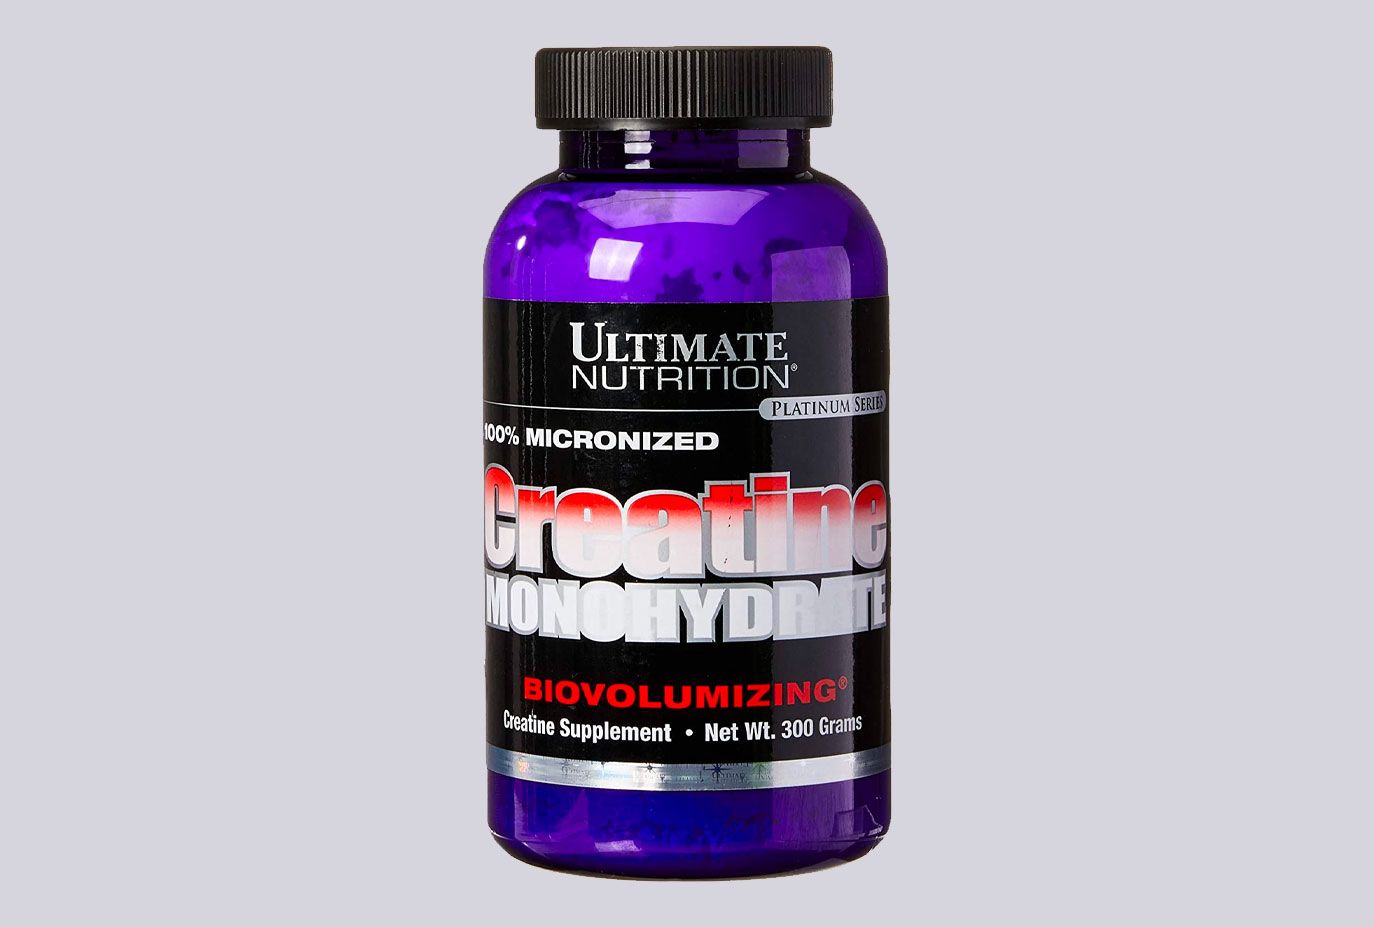 Ultimate Nutrition Micronized Creatine product image of a purple container.